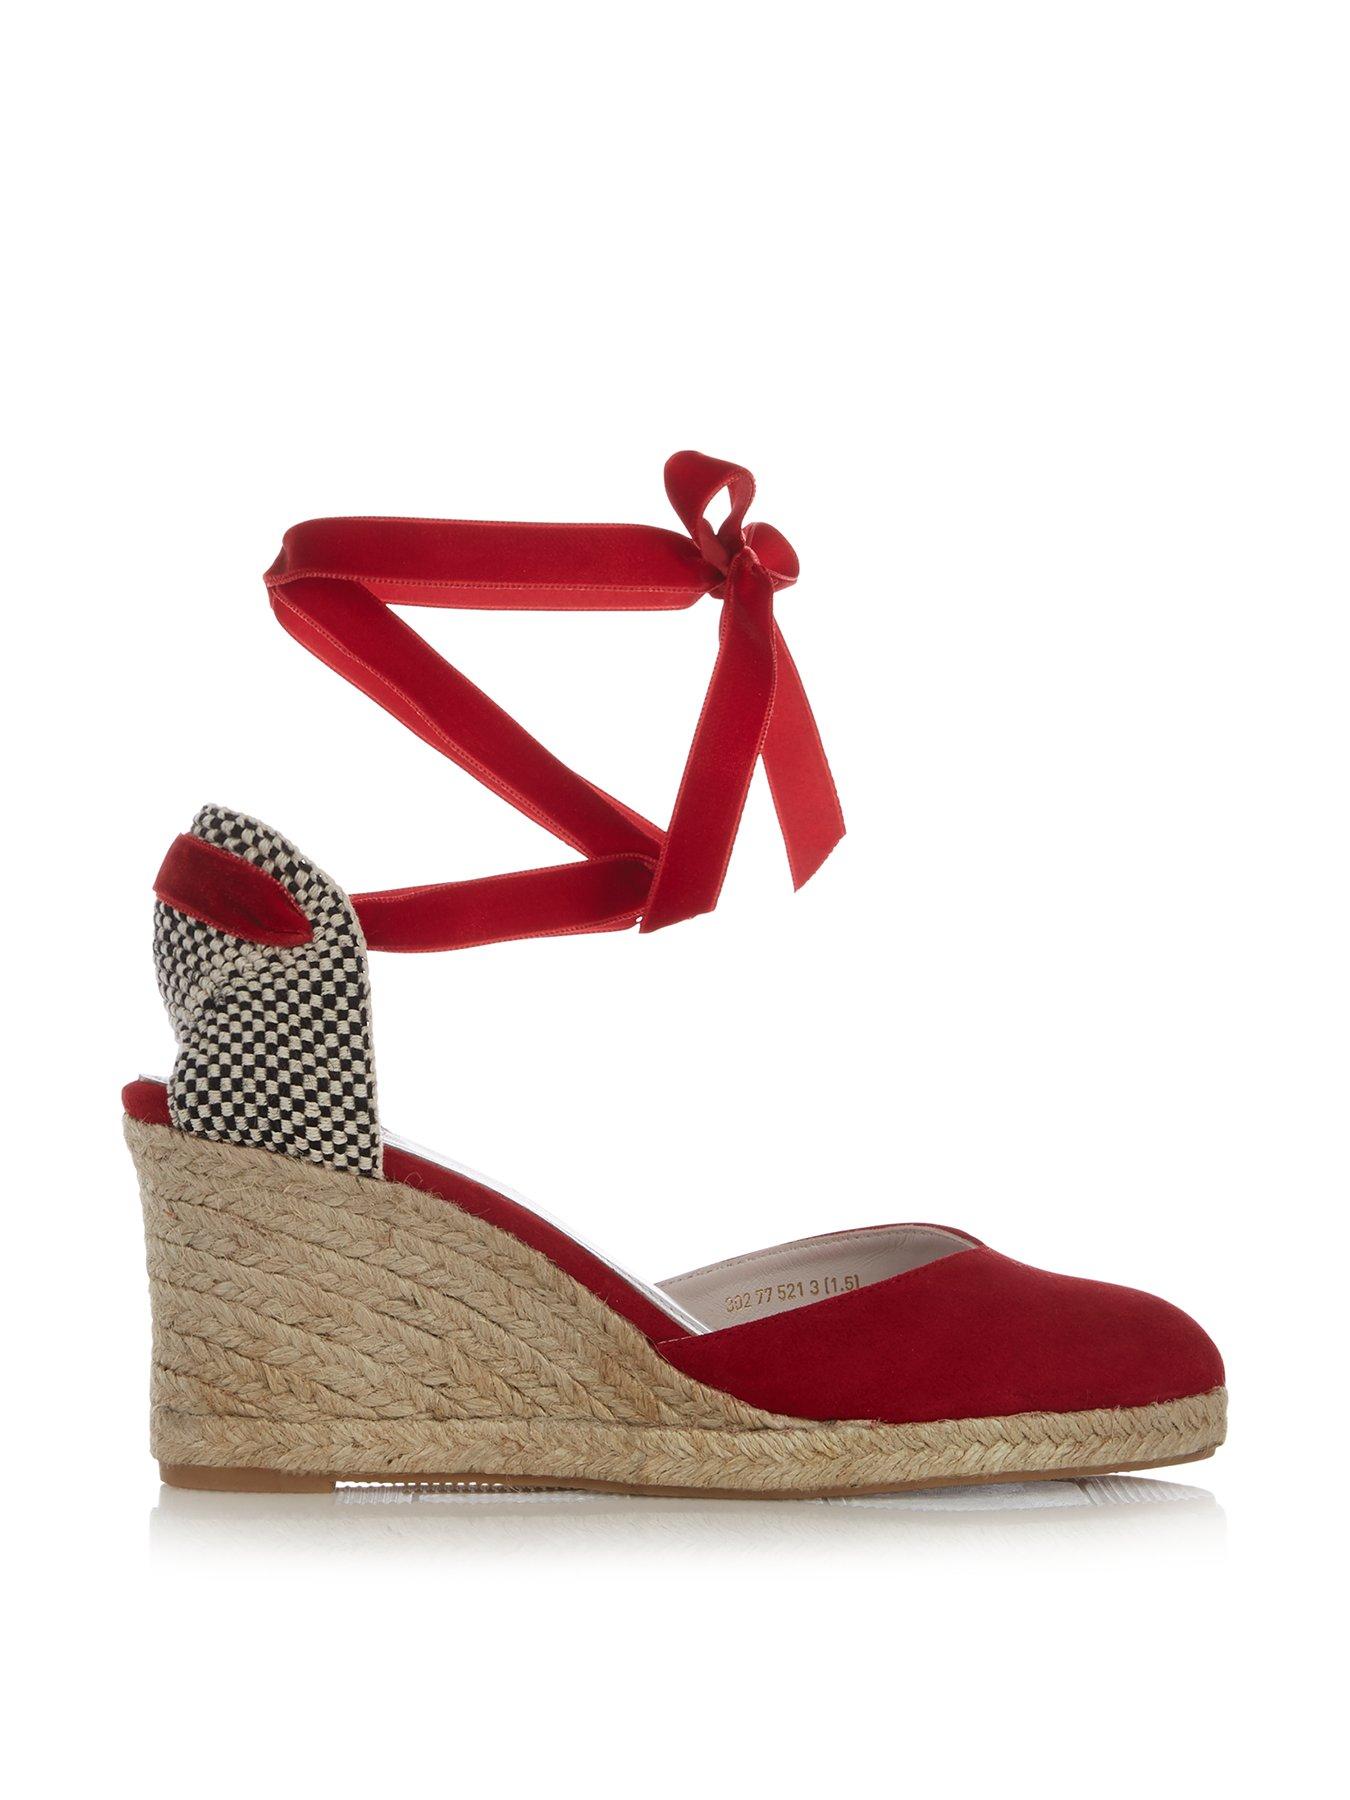 red wedges uk